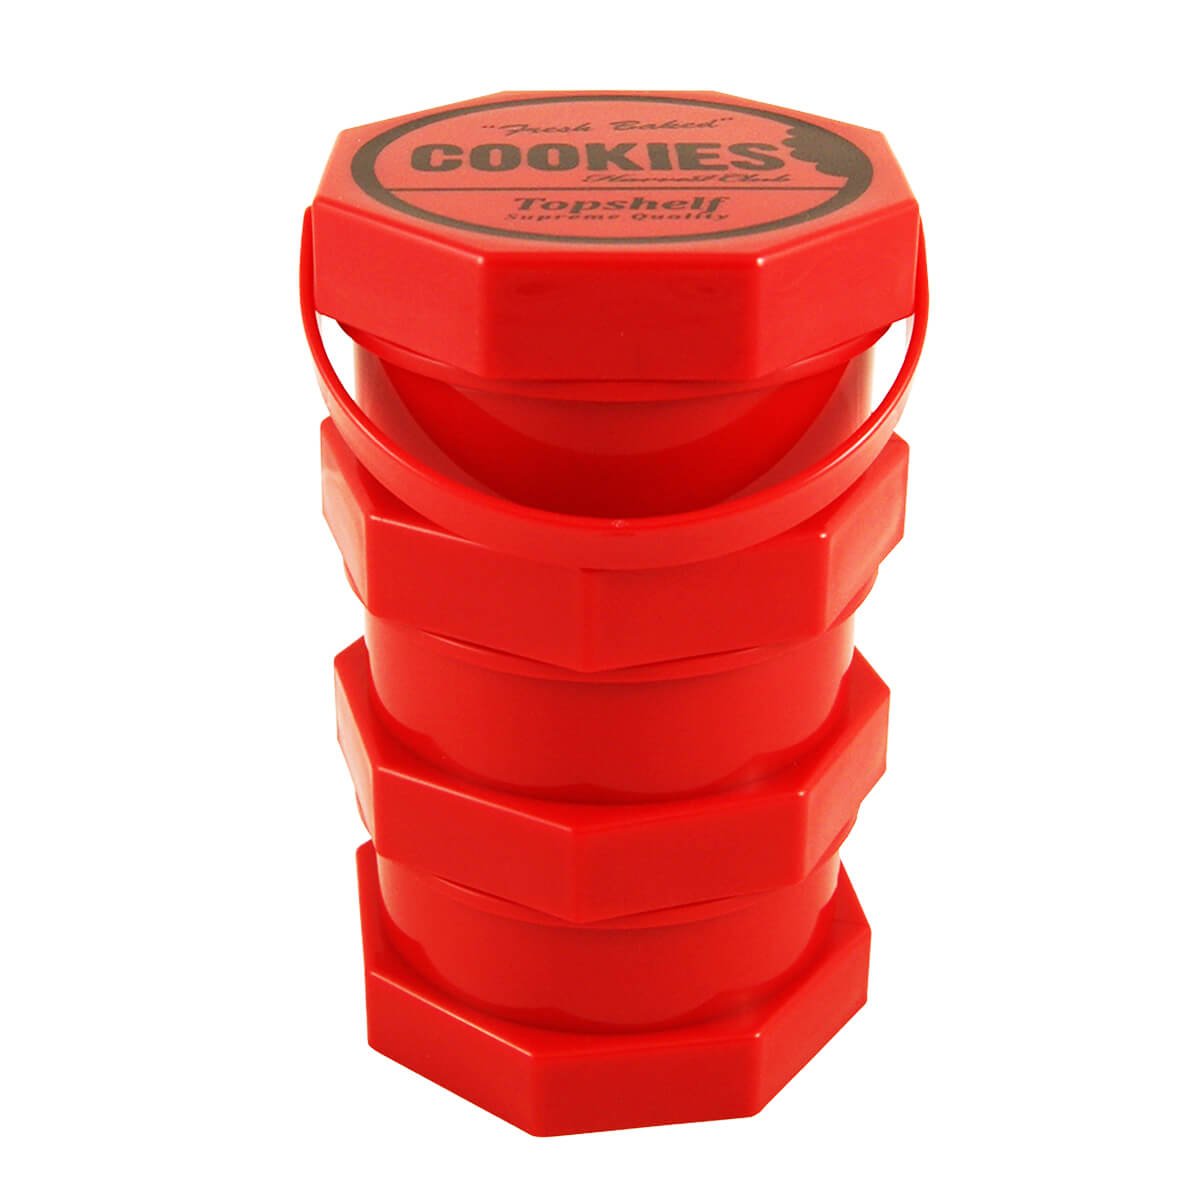 https://d30qj4y22qnbc7.cloudfront.net/wp-content/uploads/2020/10/wholesale-cookies-red-stacked-plastic-containers.jpg